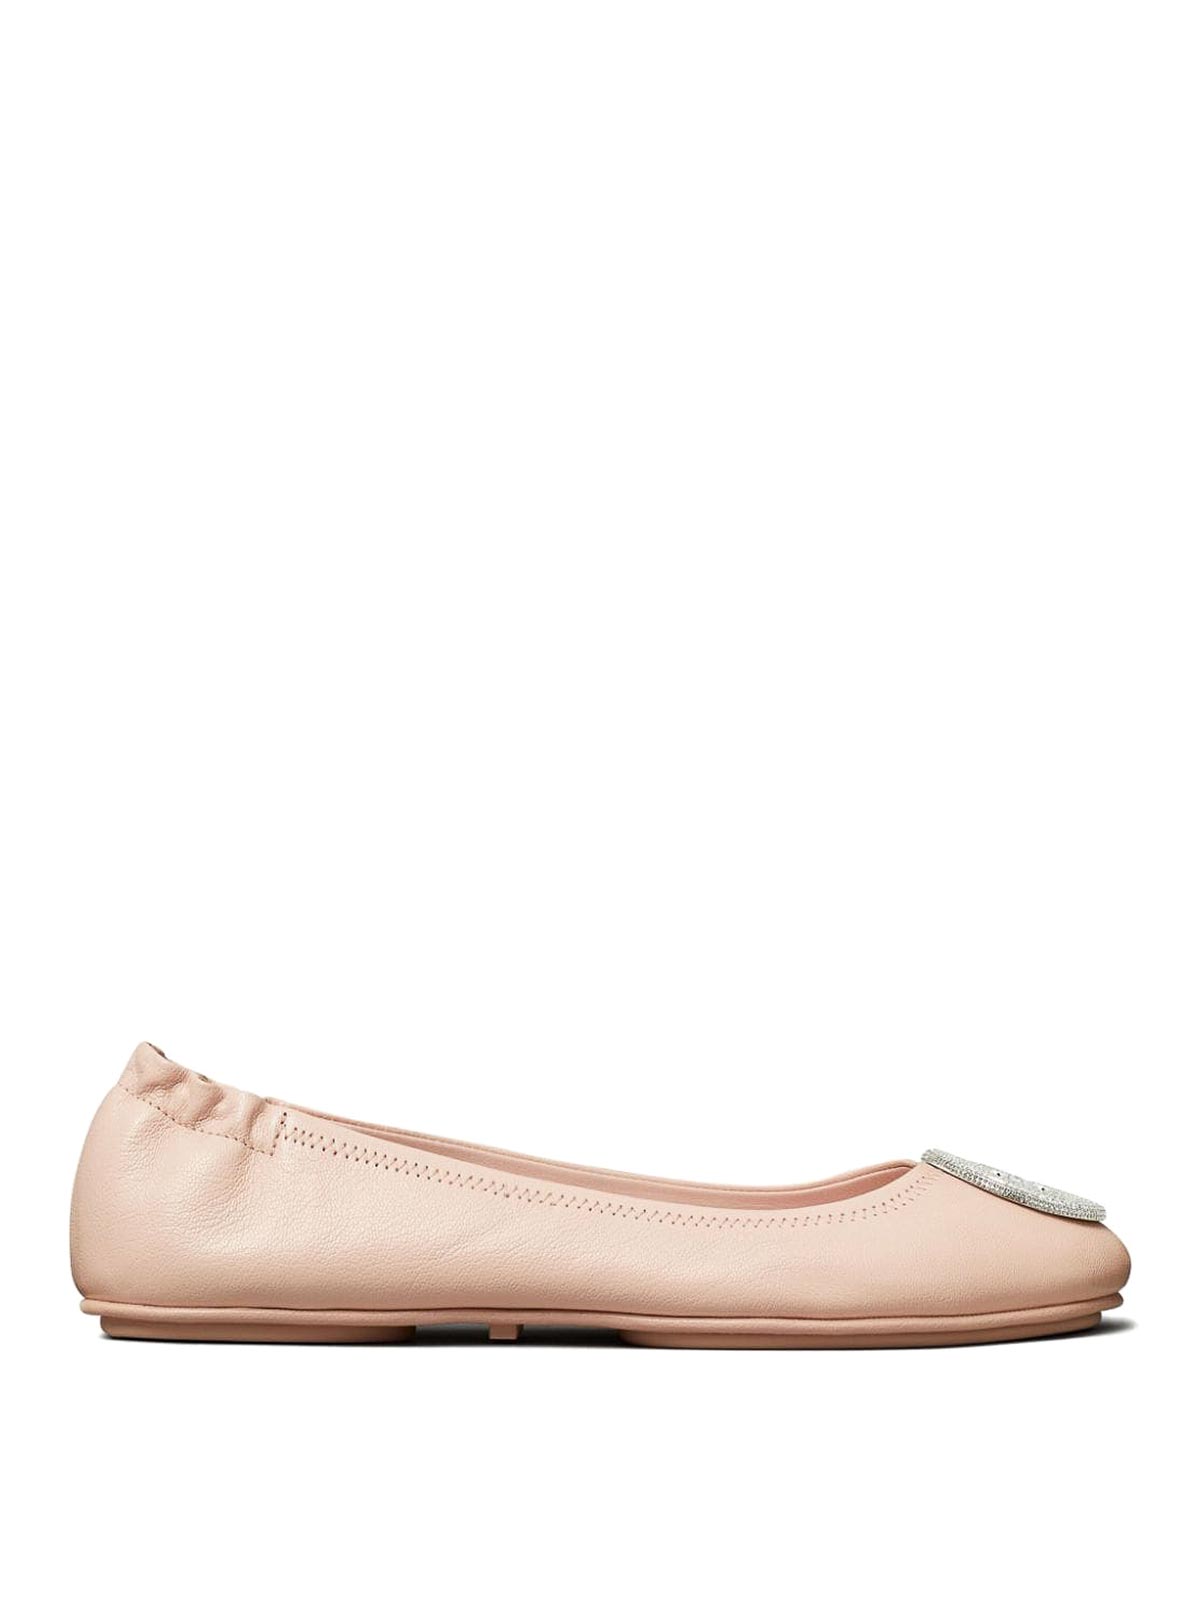 Shop Tory Burch Minnie Leather Ballet Flats In Light Pink